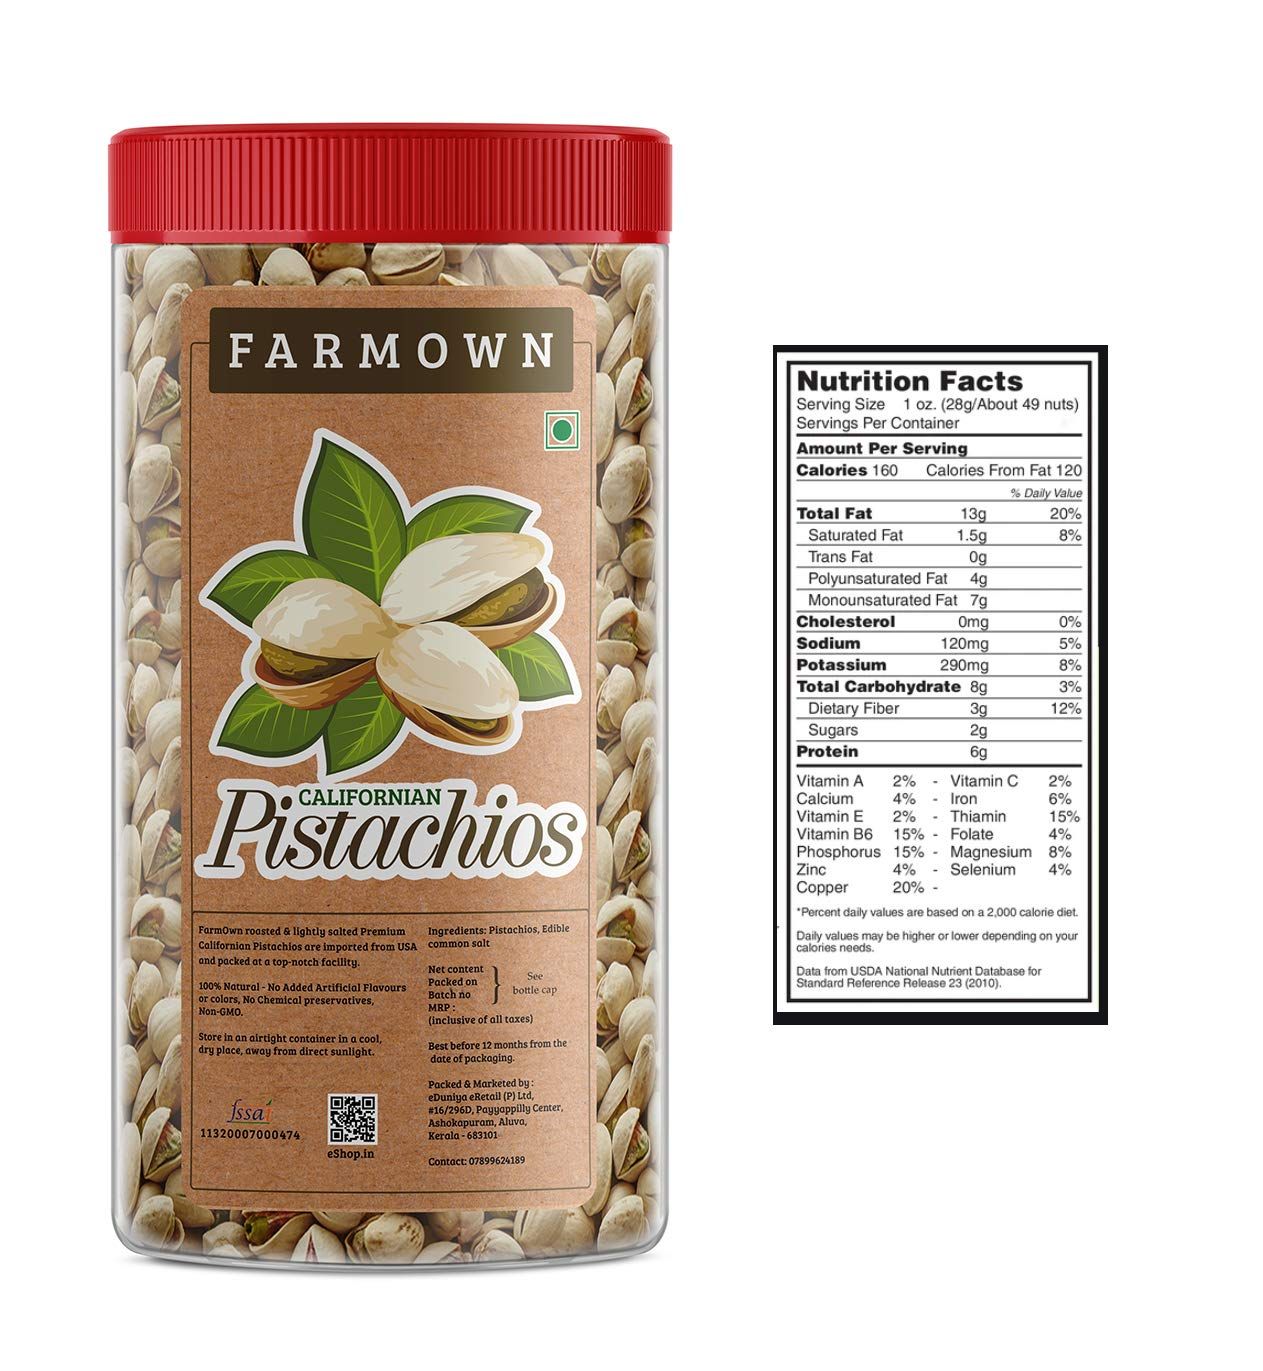 Farmown Roasted And Salted Pistachios Image